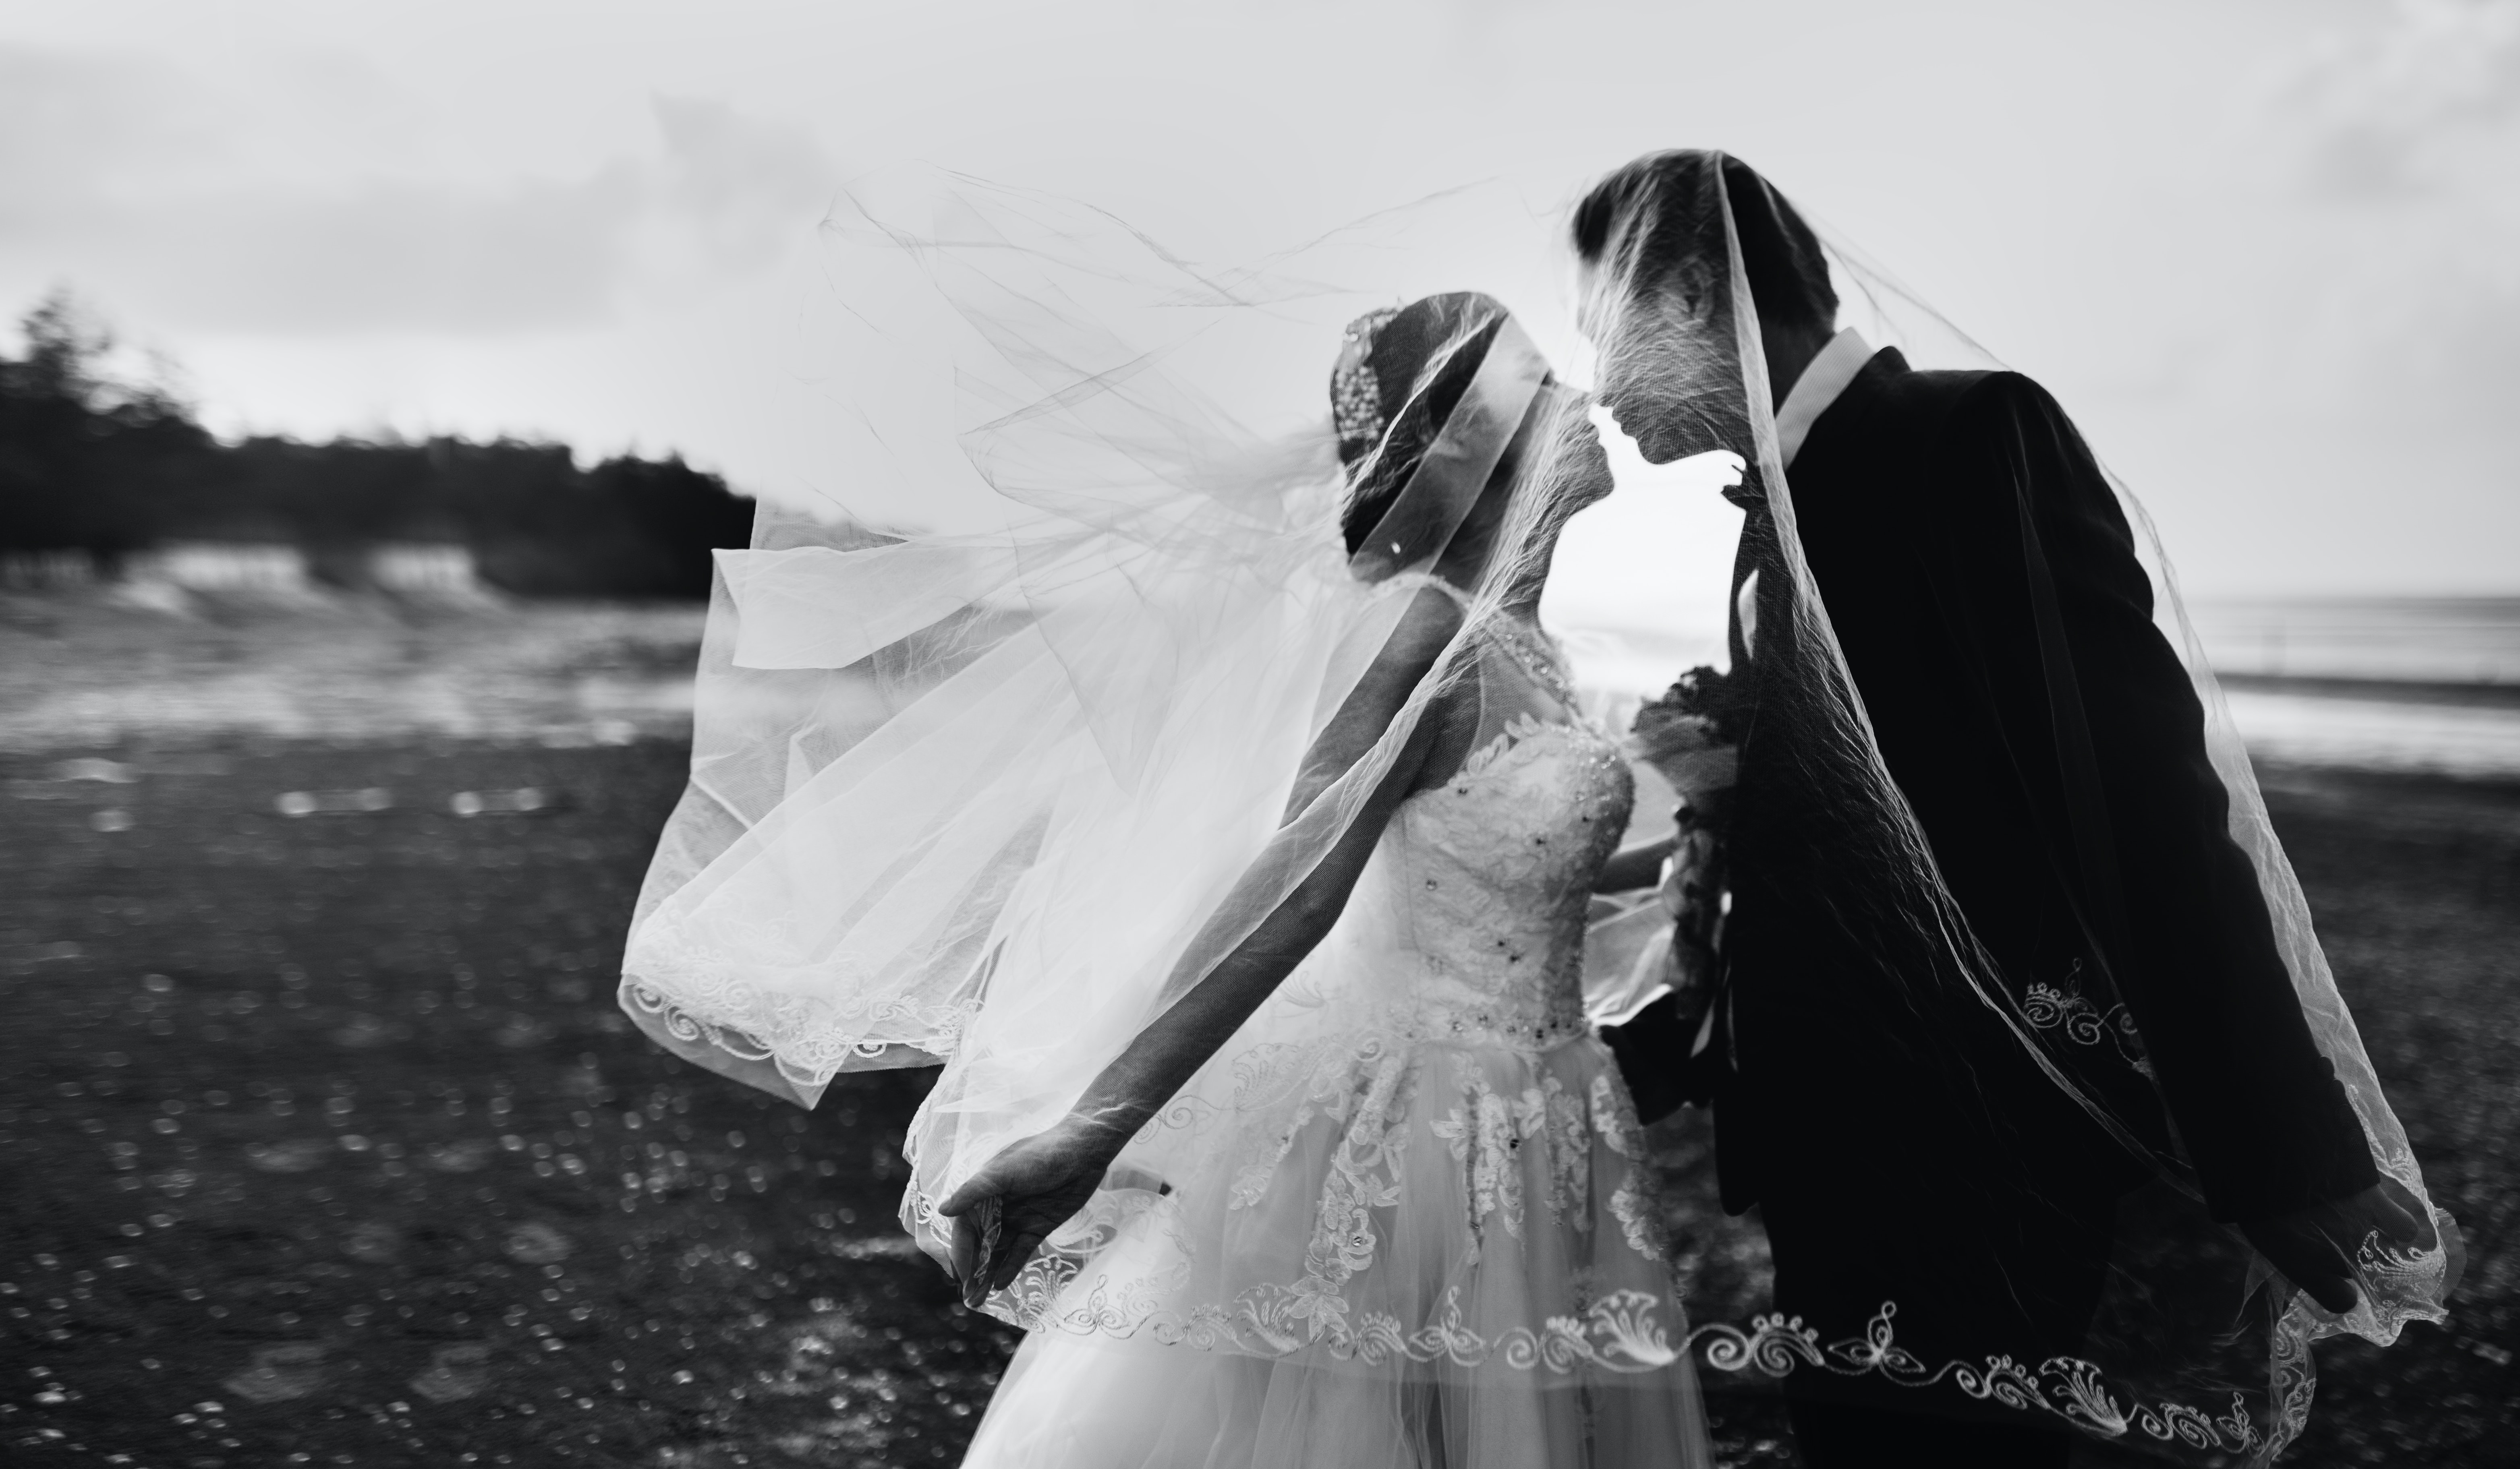 A photo of a bride and groom kissing | Source: Unsplash